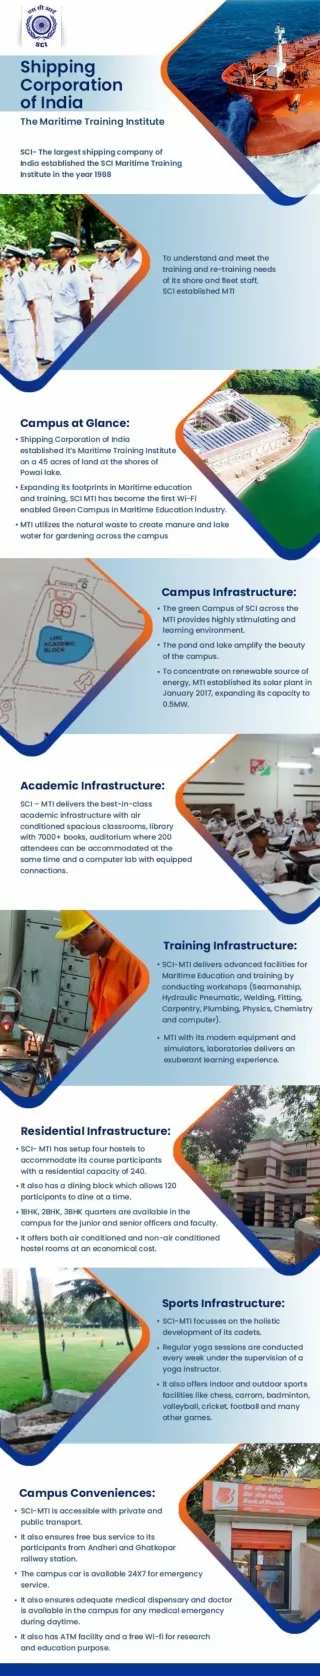 Shipping Corporation of India - The Maritime Training Institute